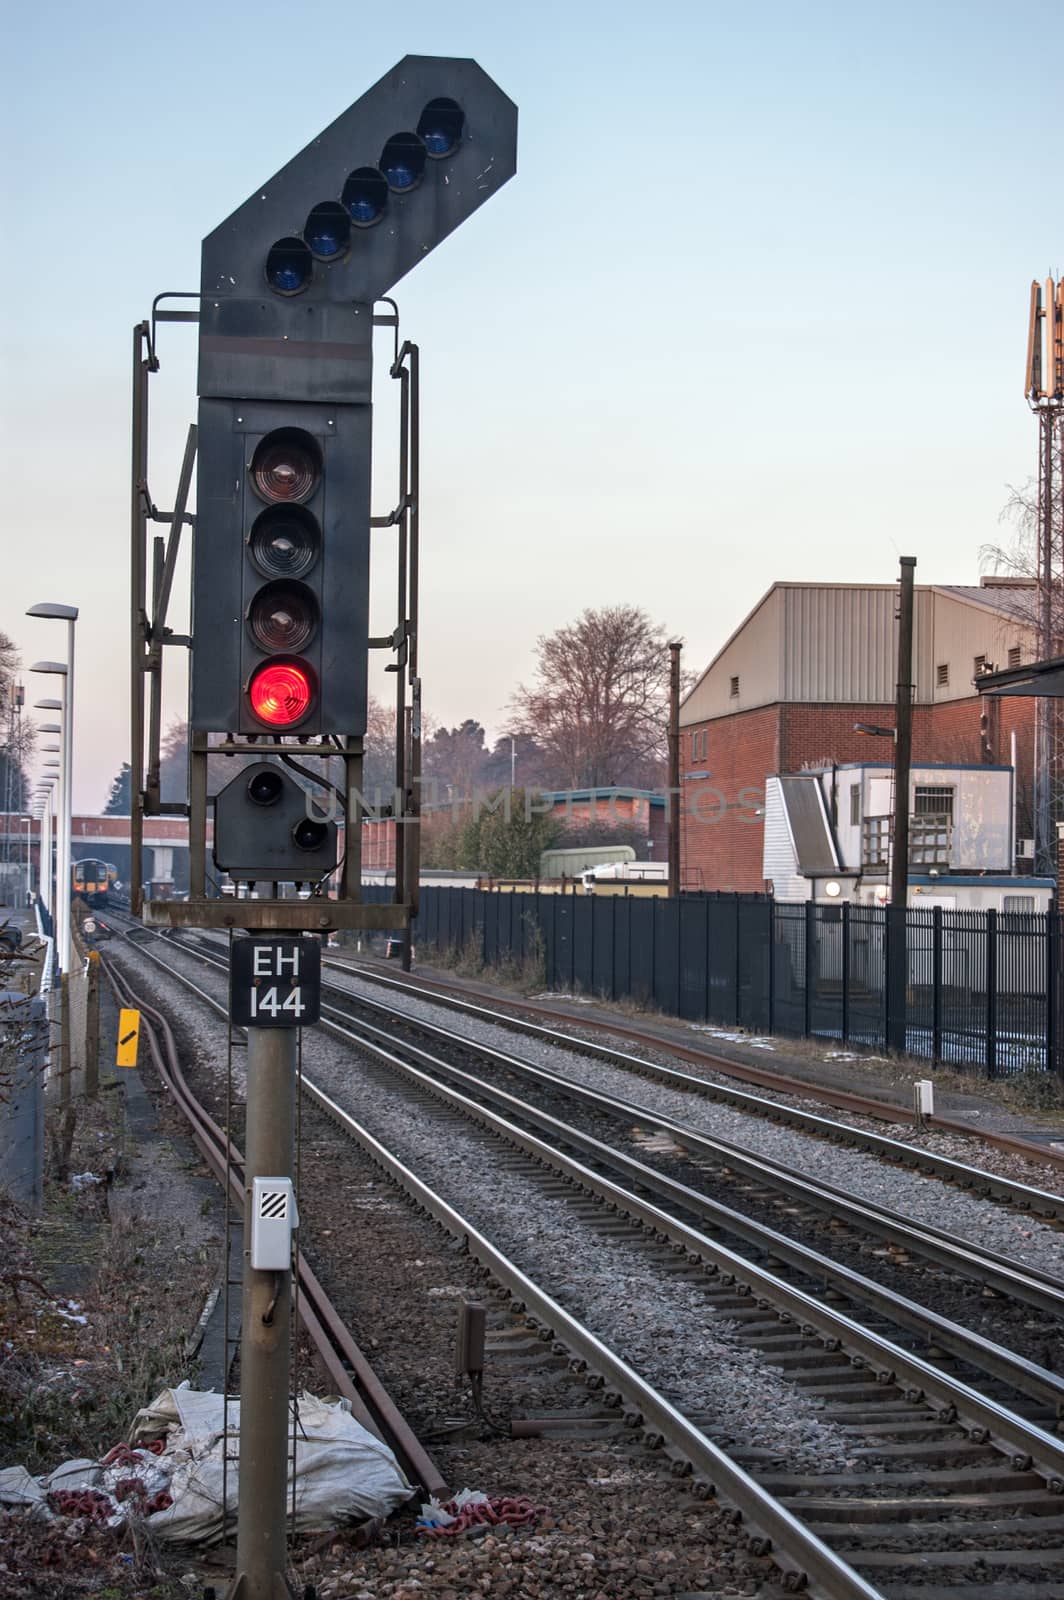 Red danger signal on UK Railway line by BasPhoto